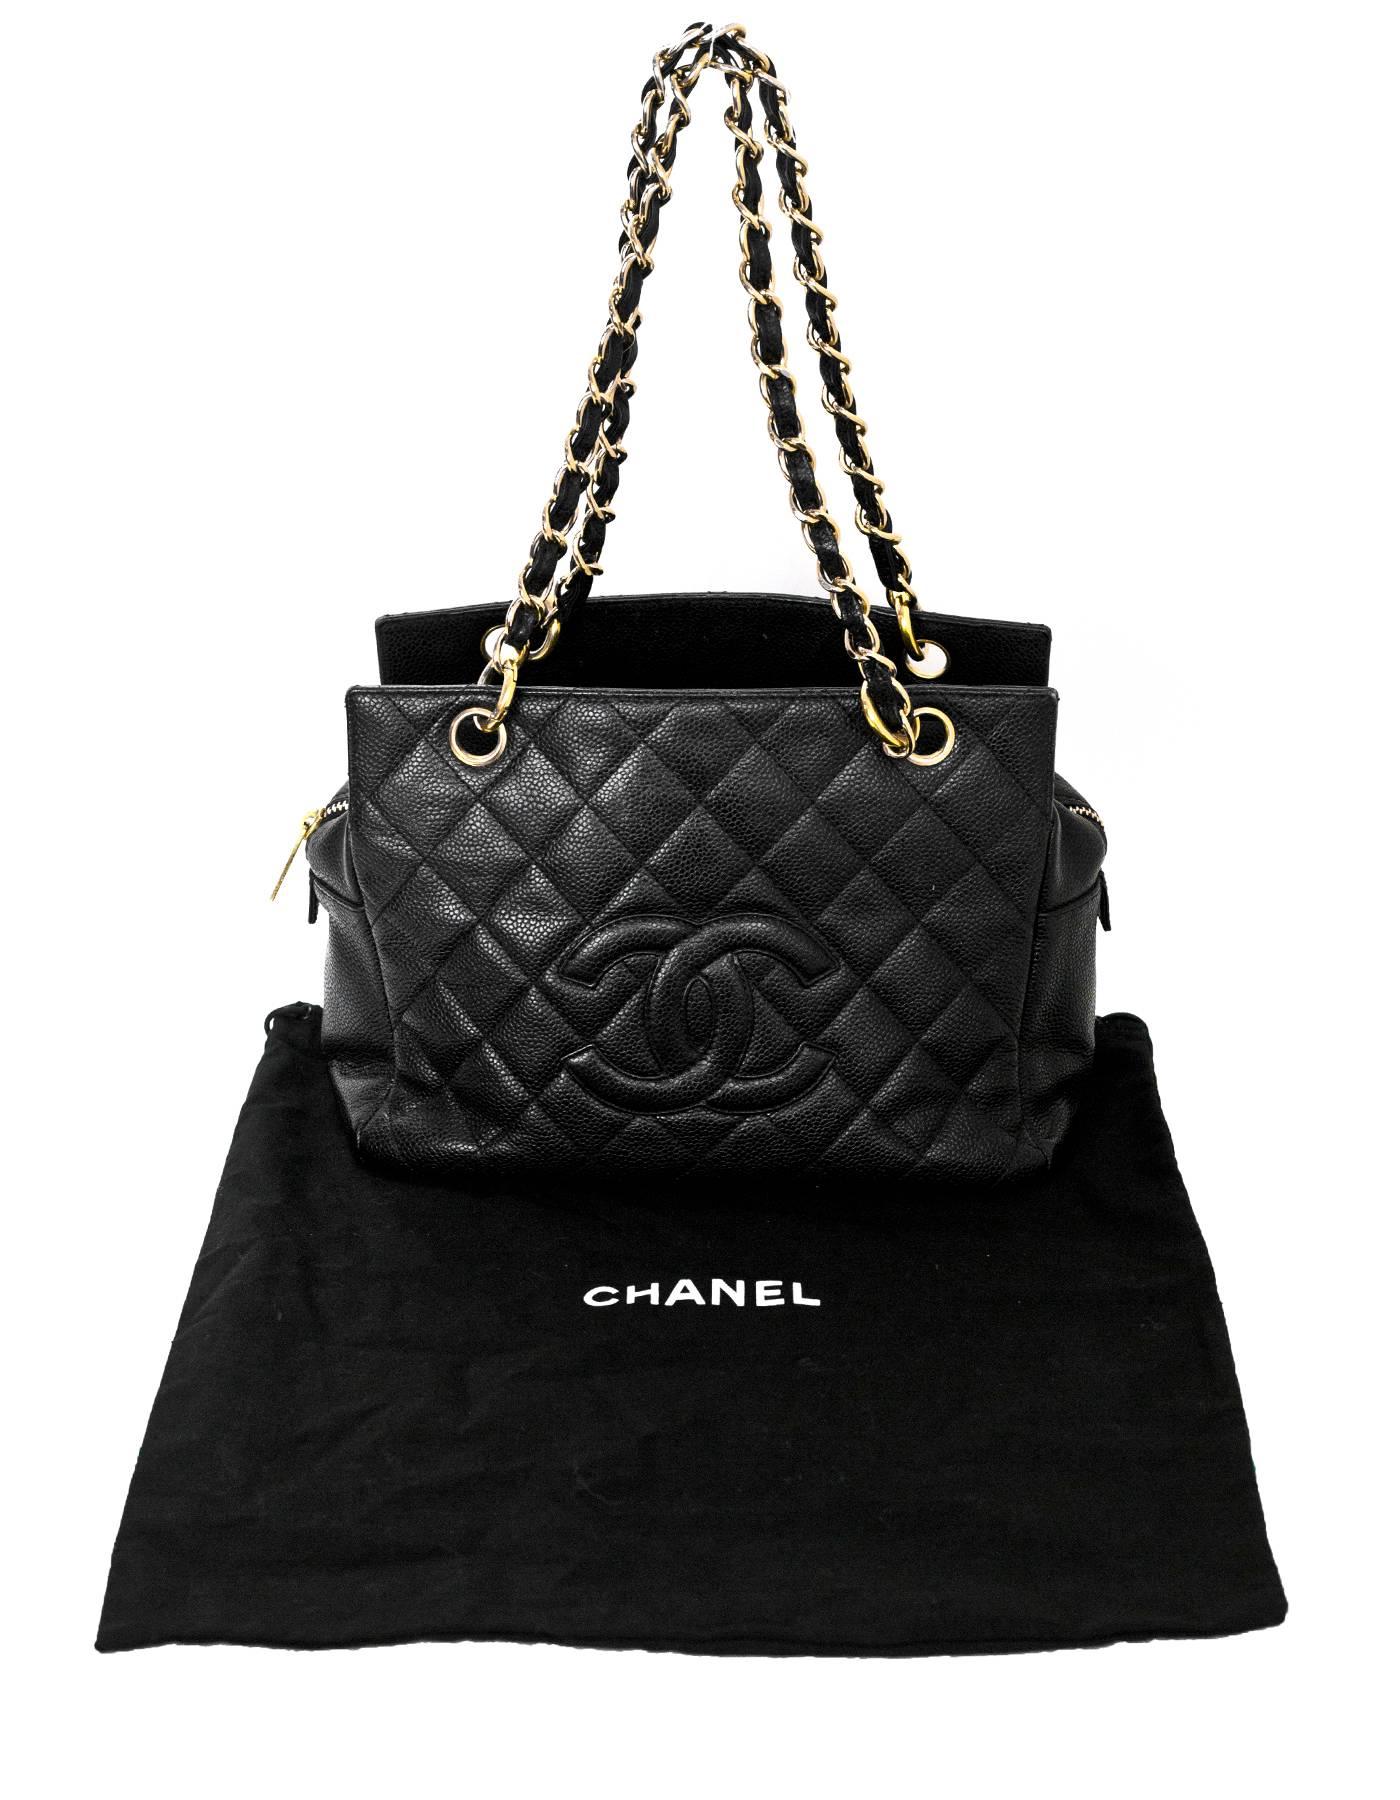 Chanel Black Caviar Leather Quilted Petite Timeless Tote PTT Bag 3